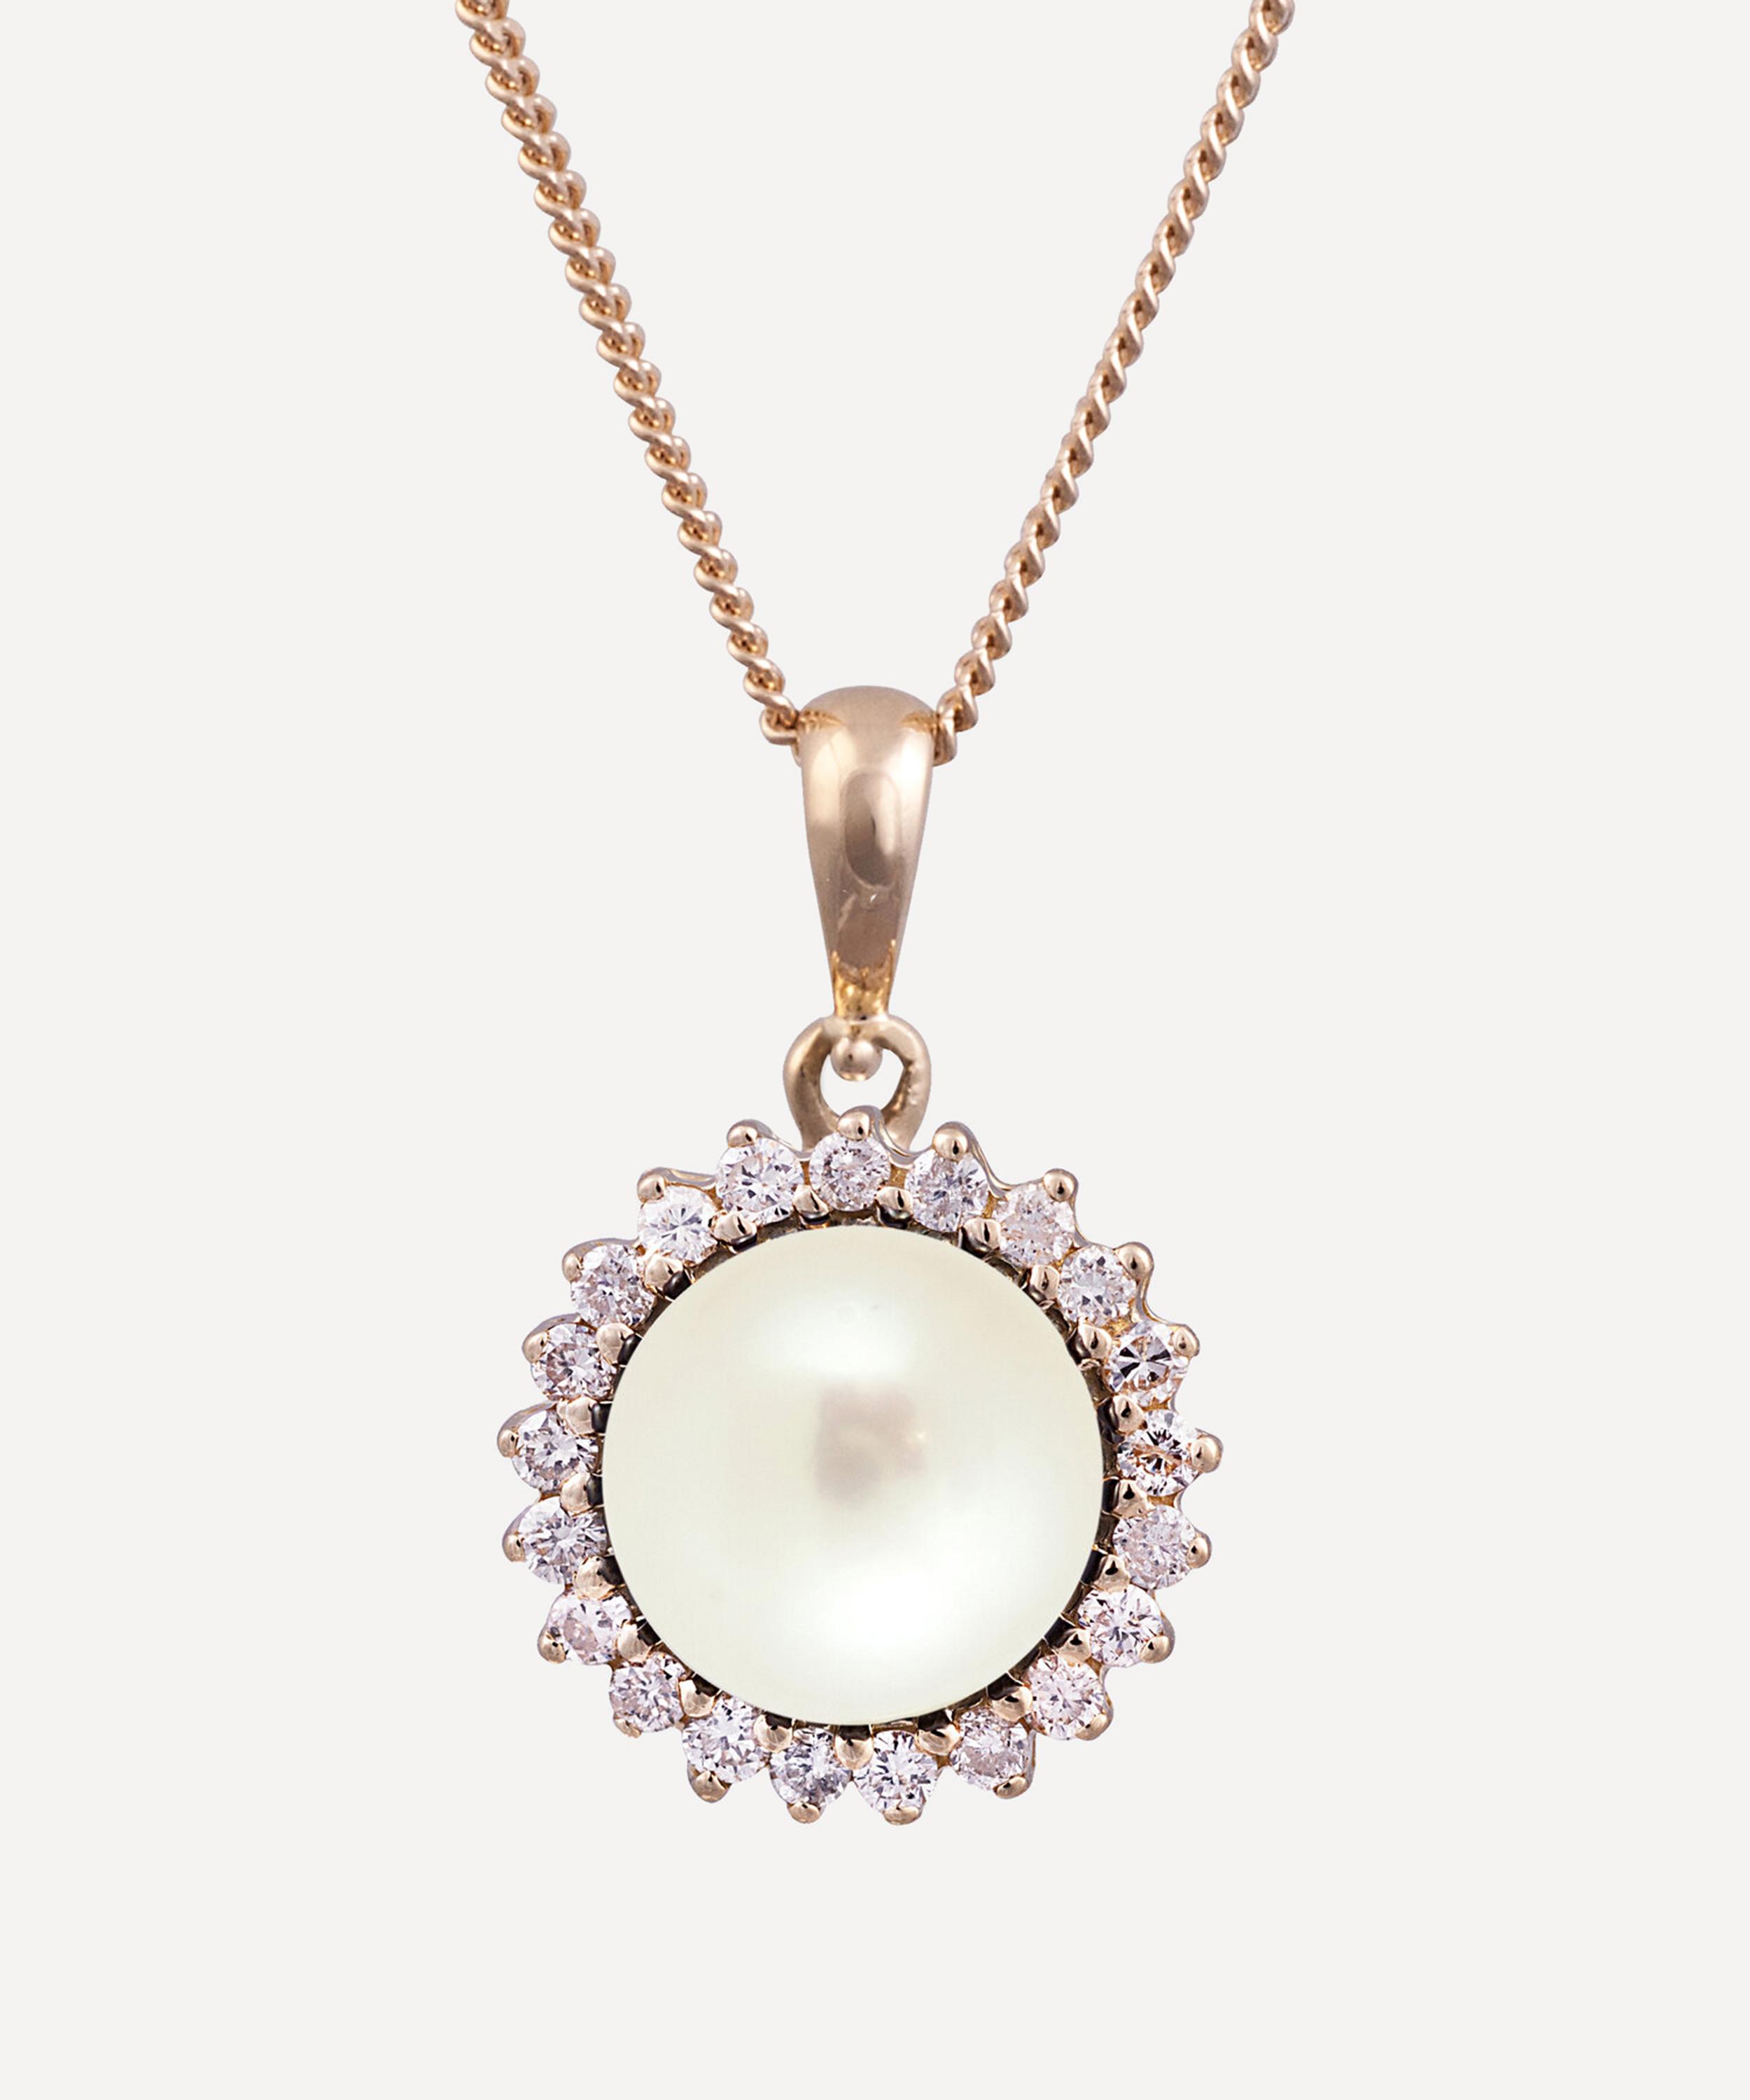 Kojis Gold Pearl And Diamond Cluster Pendant Necklace